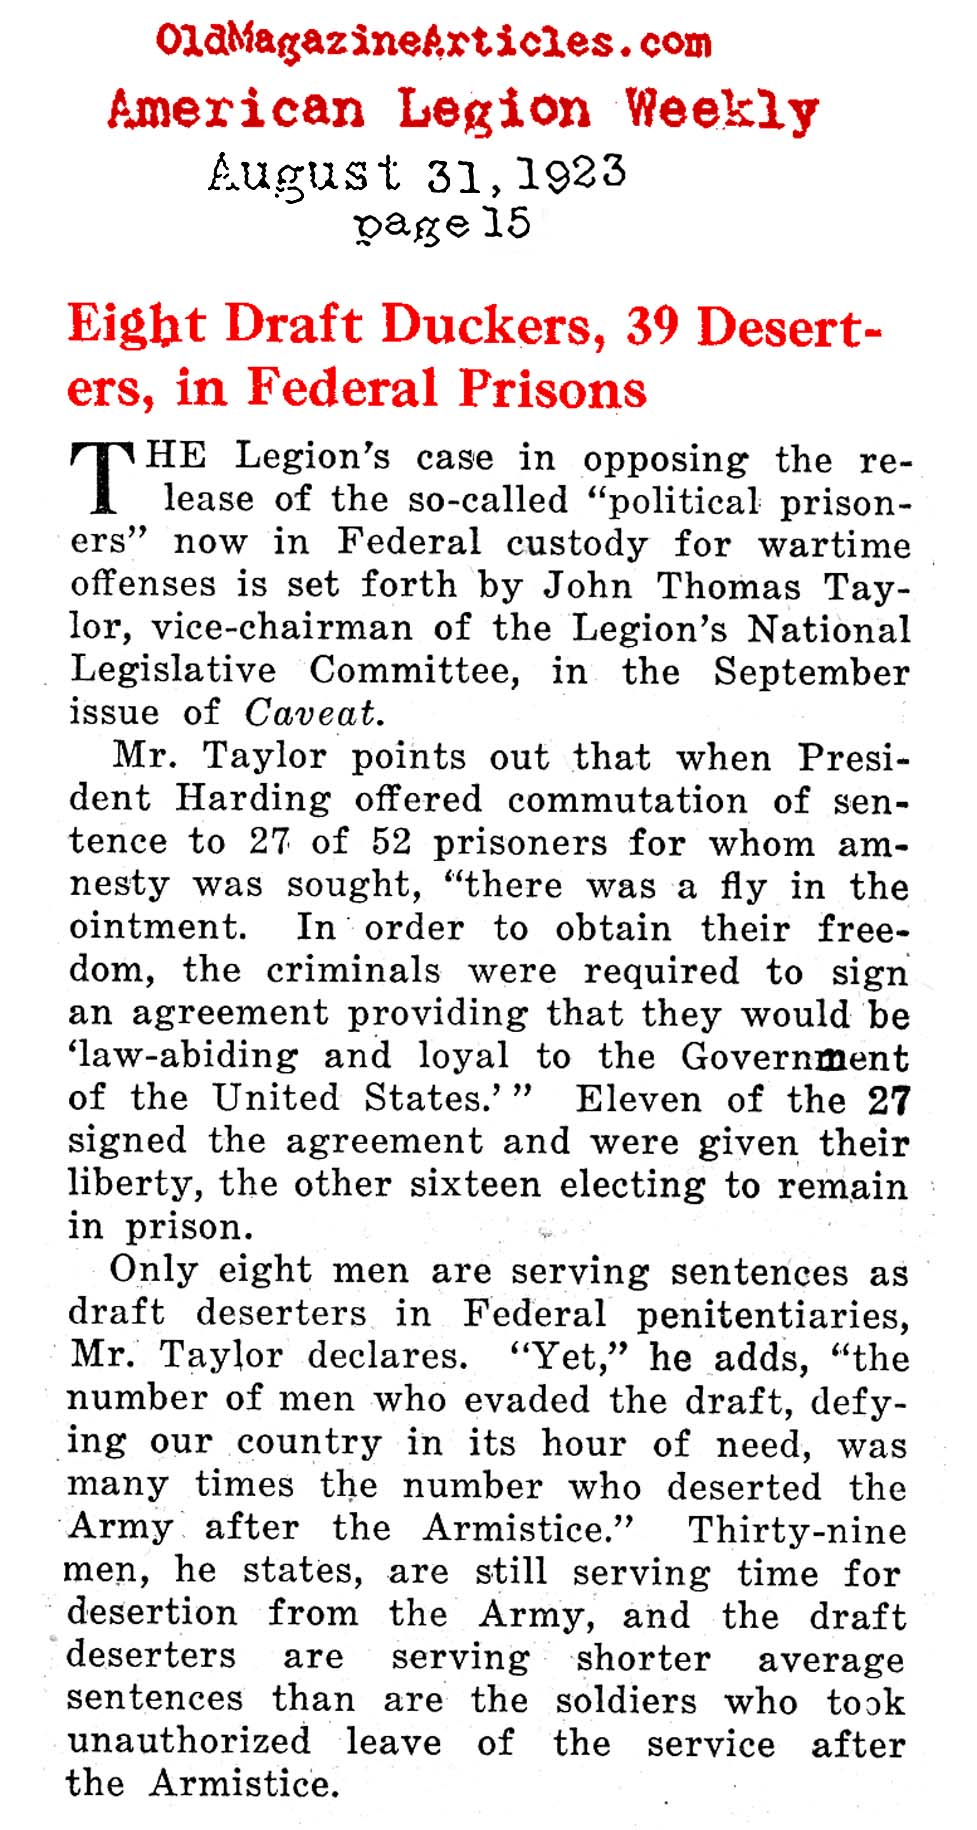 Draft-Dodgers and Deserters in Federal Prison (American Legion Weekly, 1923)